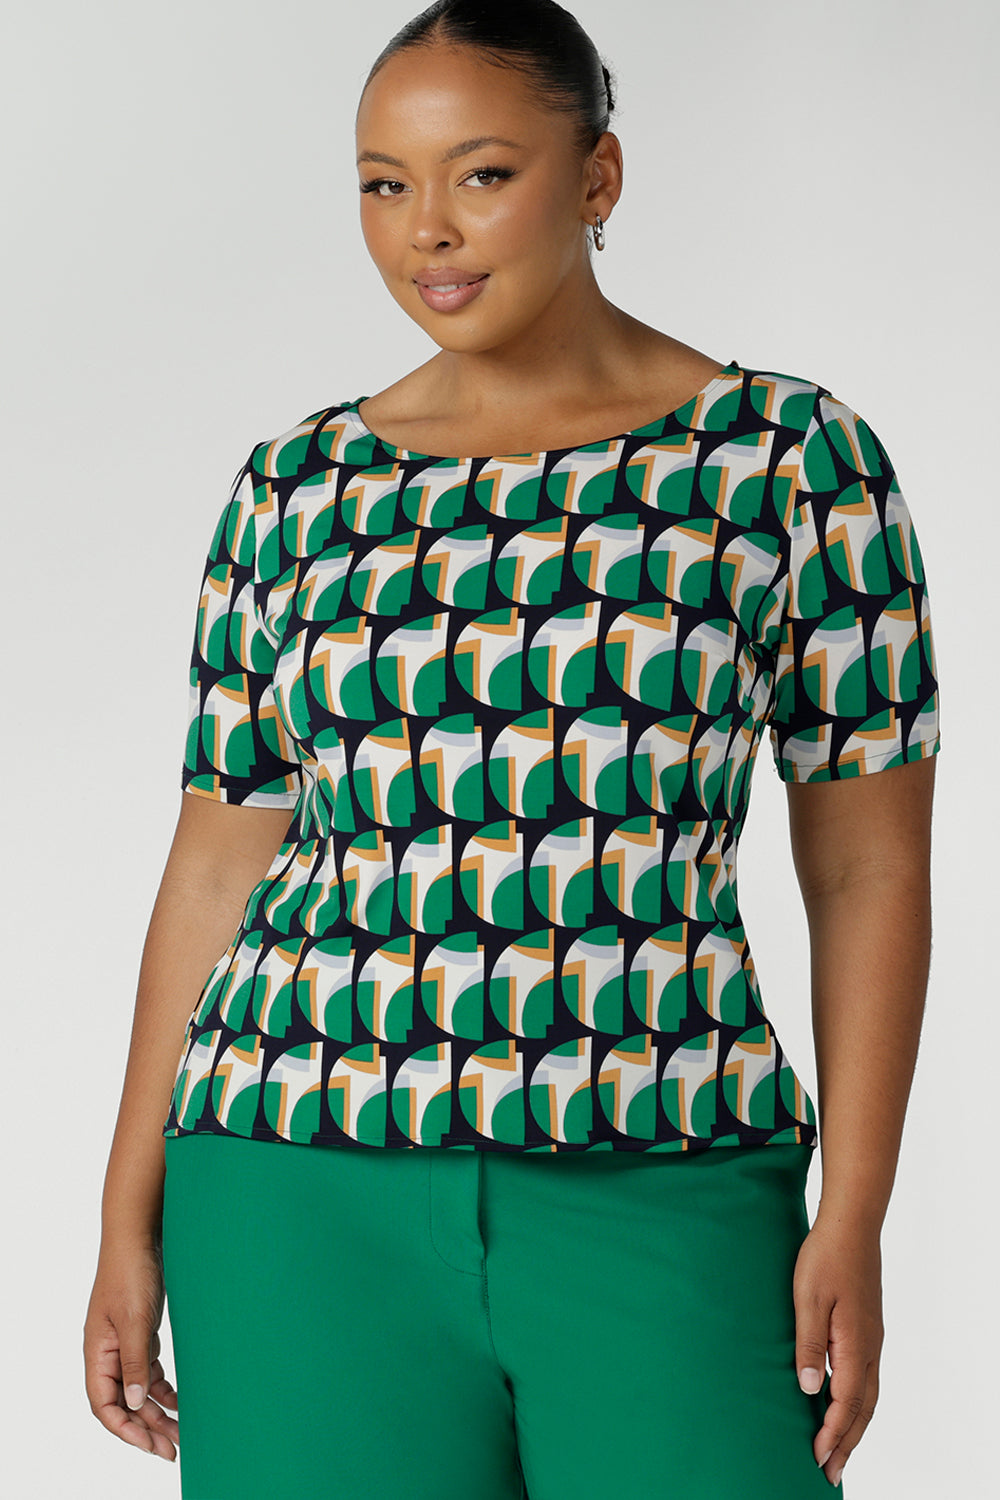 A curvy size 18 woman wears a boat neck elbow length sleeve jersey top in a geometric print. She wears the top. Designed and made in Australia for petite to plus size women.